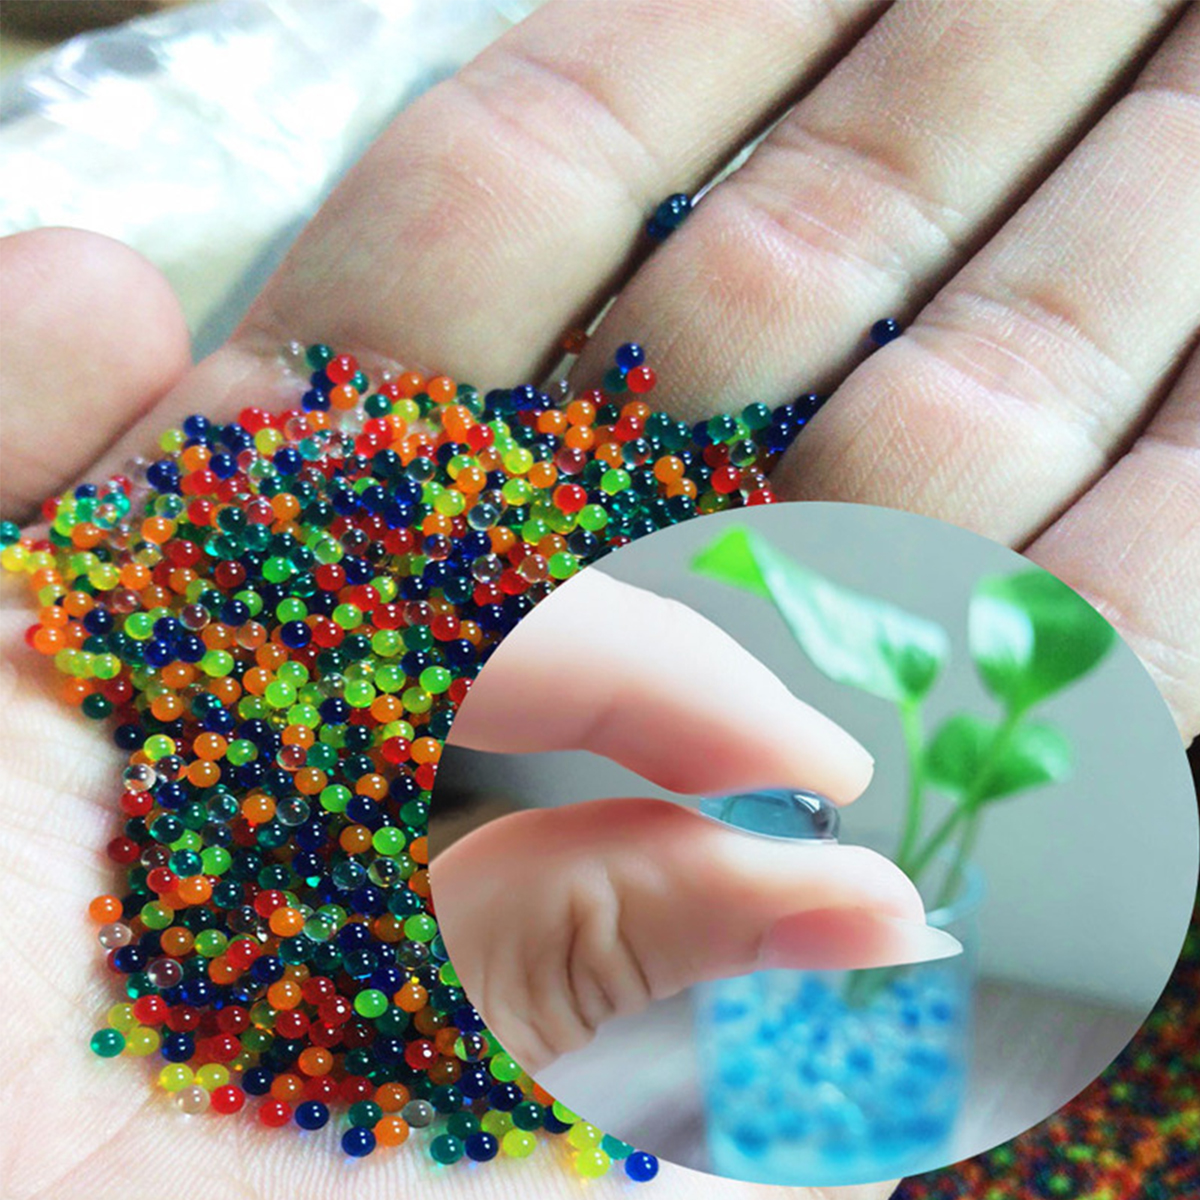 20000Pcs-7-8mm-Gel-Ball-Crystal-Water-Beads-Part-For-Nerf--Plant-Flower-Crystal-Soil-Mud-1350925